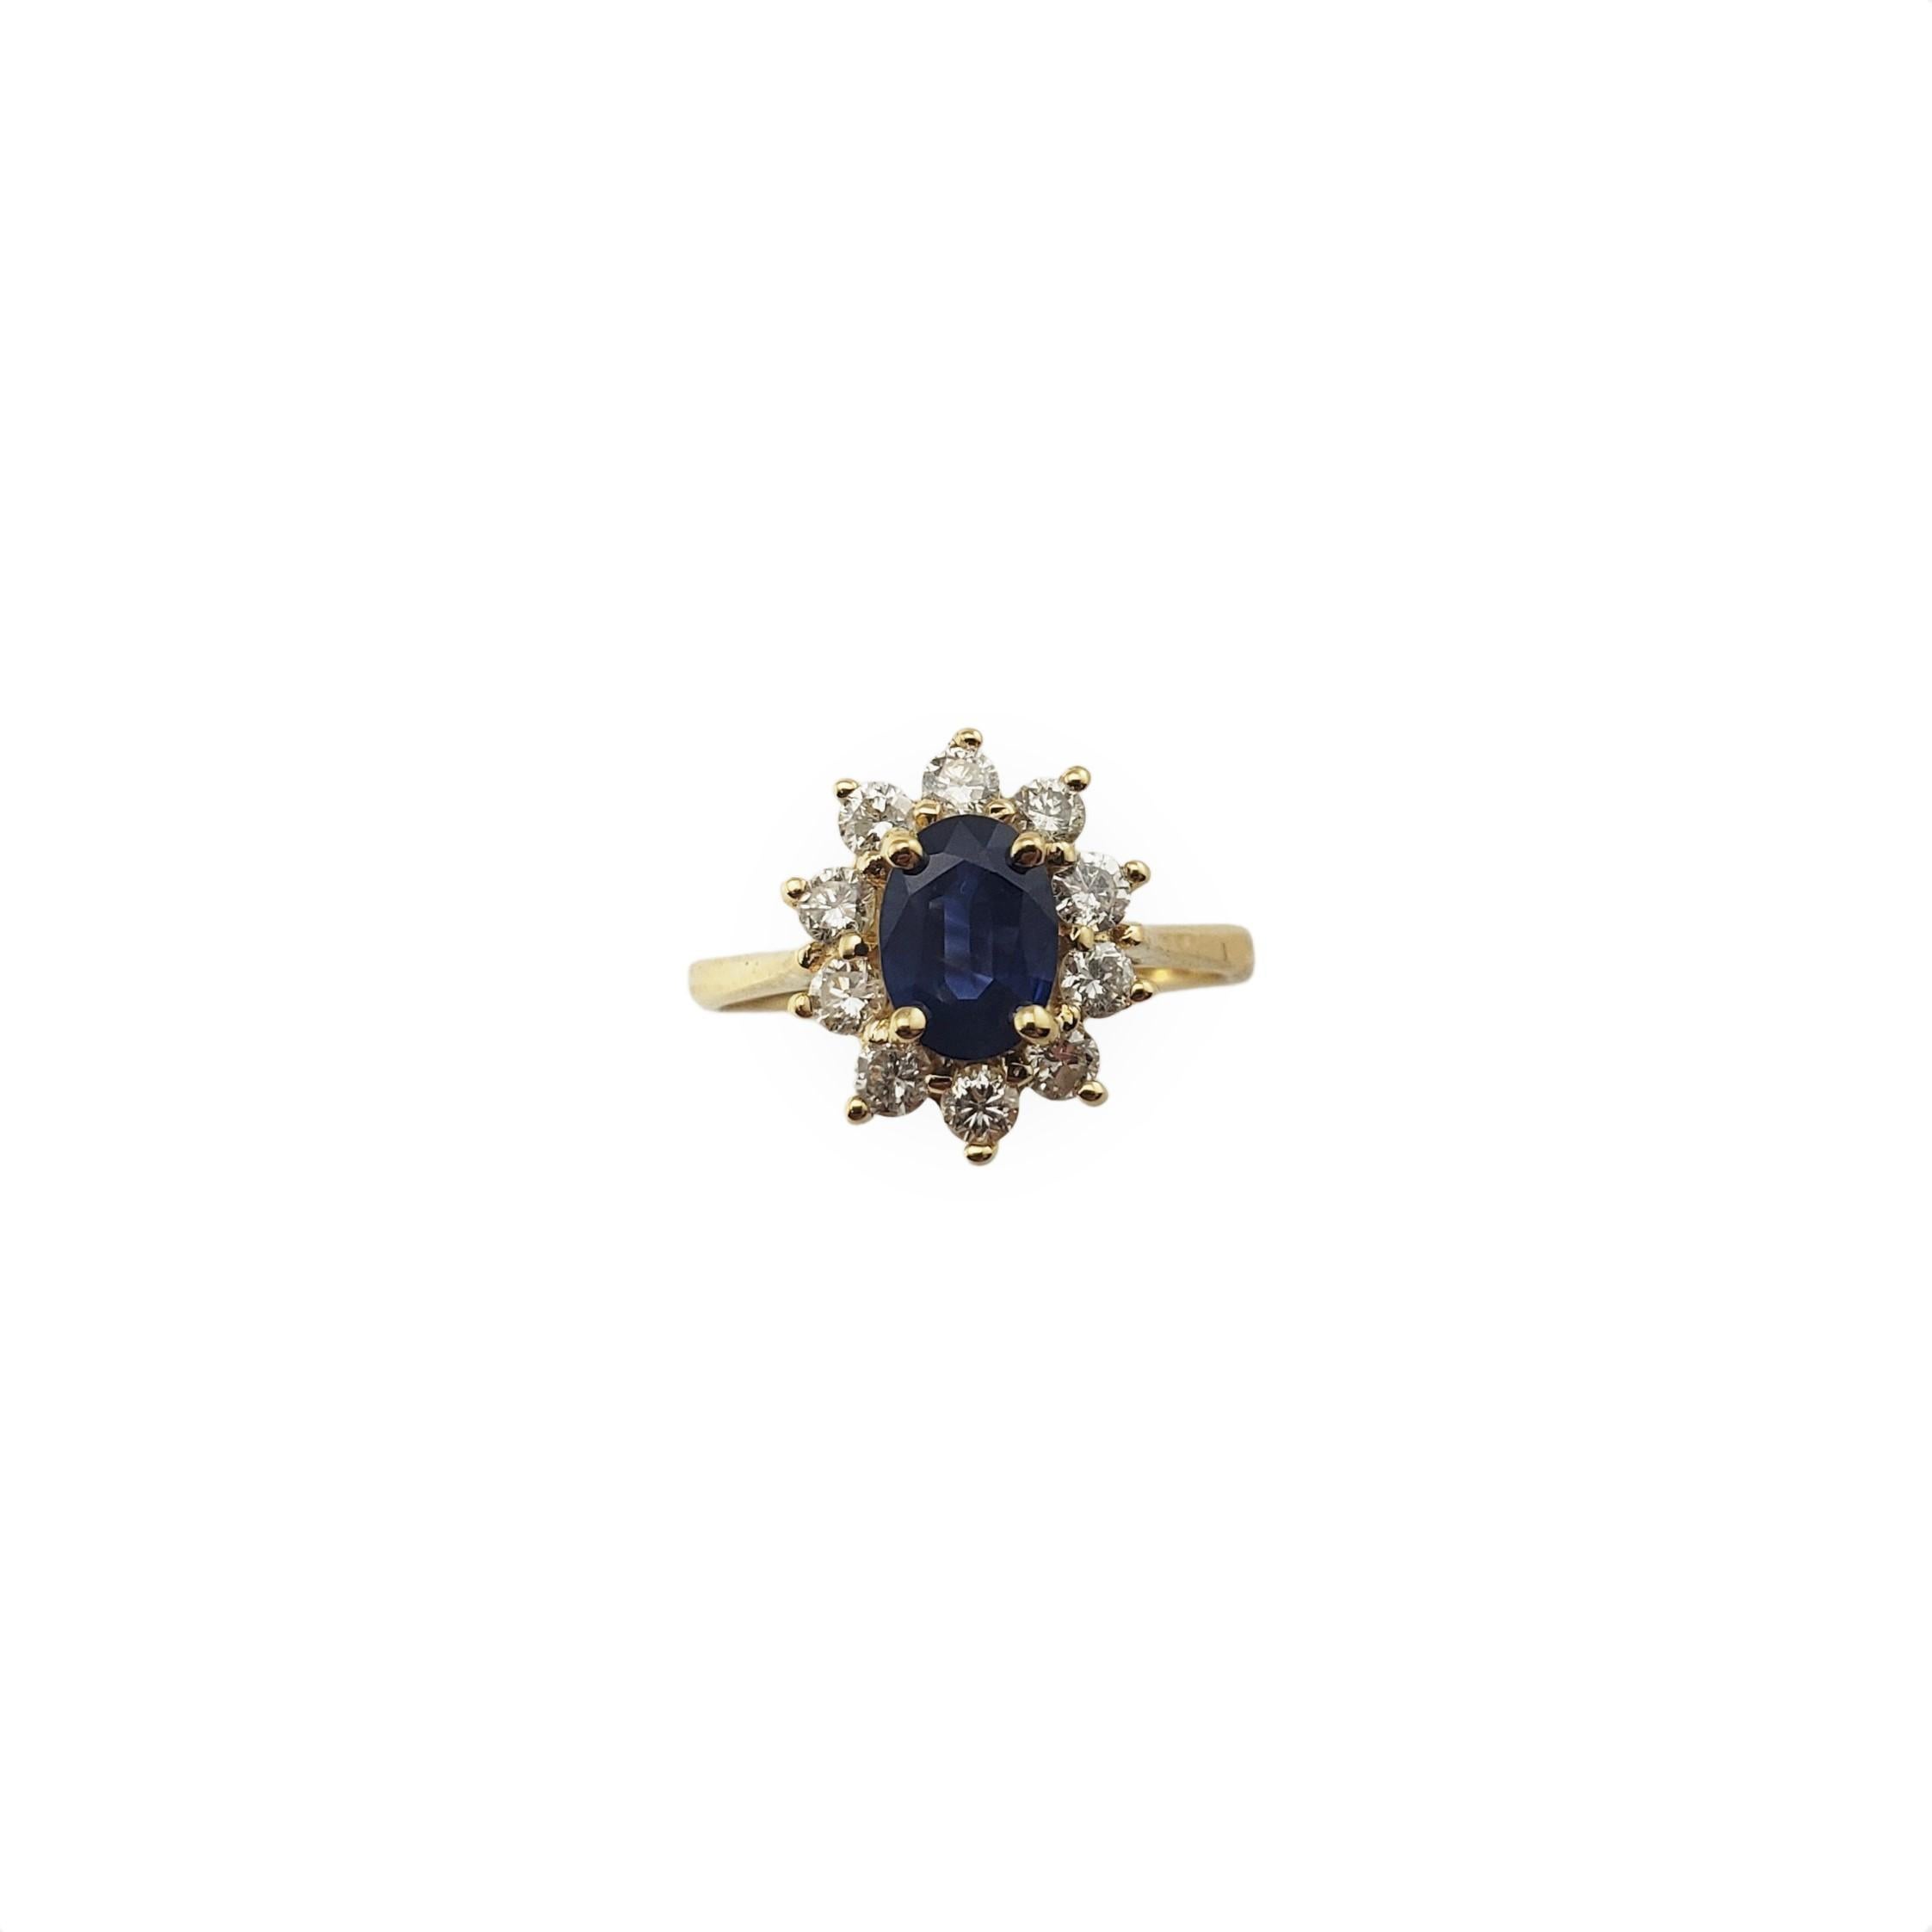 This lovely ring features one oval sapphire (7 mm x 5 mm) surrounded by ten round brilliant cut diamonds.

Width:  12 mm.

Shank:  2.5 mm.

Approximate total diamond weight:   .50 ct.

Diamond color: G

Diamond clarity:  SI1-I1

Ring Size: